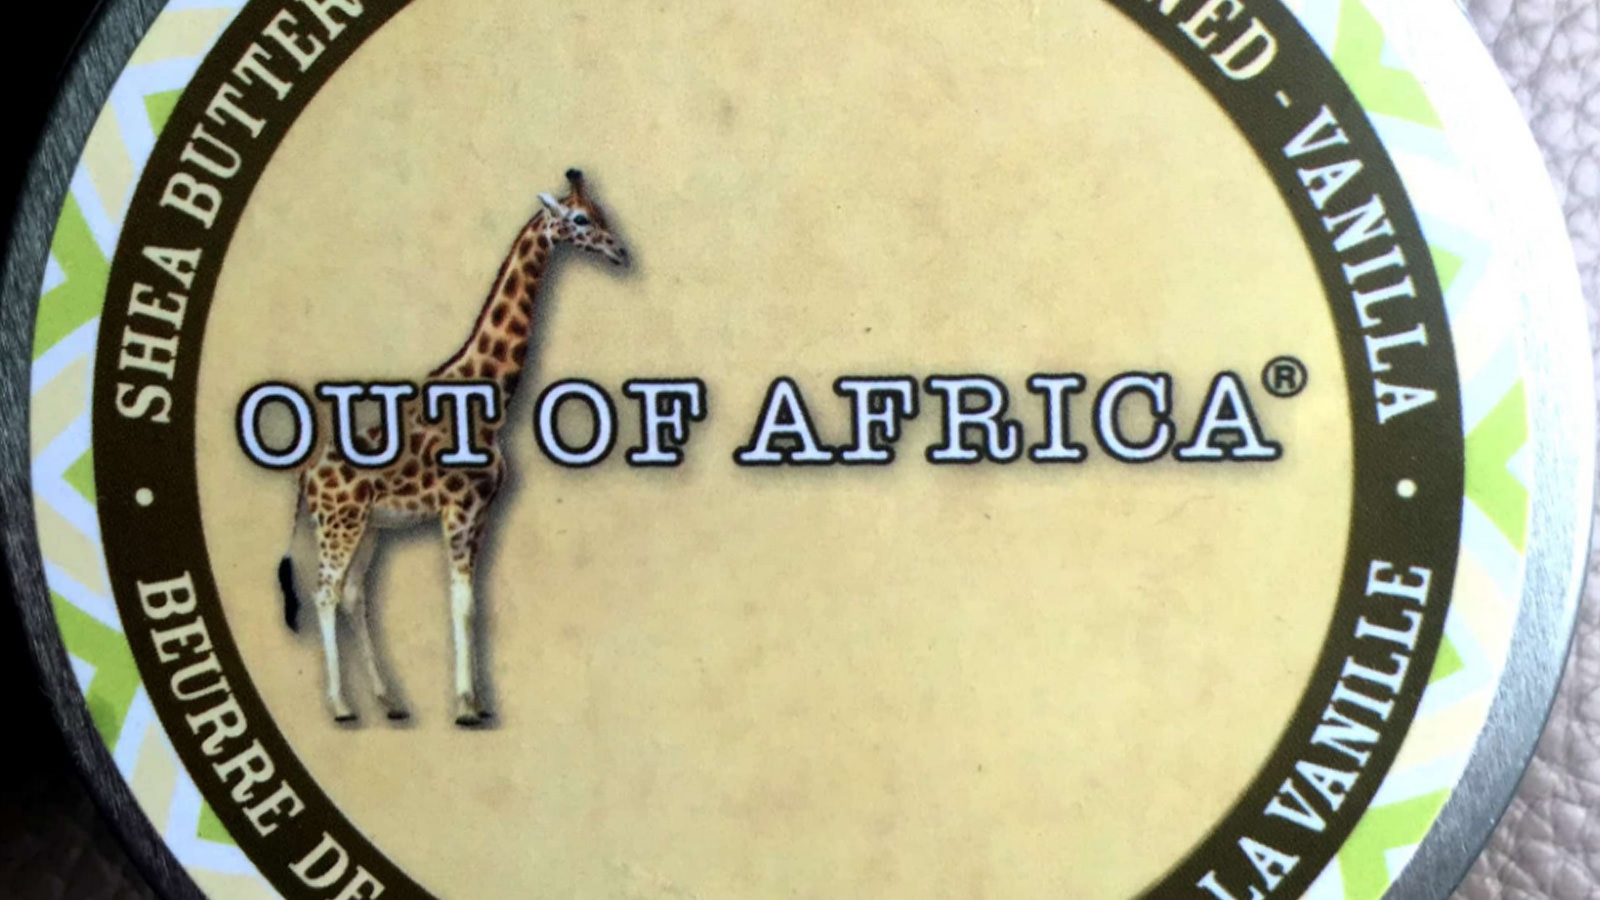 Out of Africa Shea Butter Products for social good